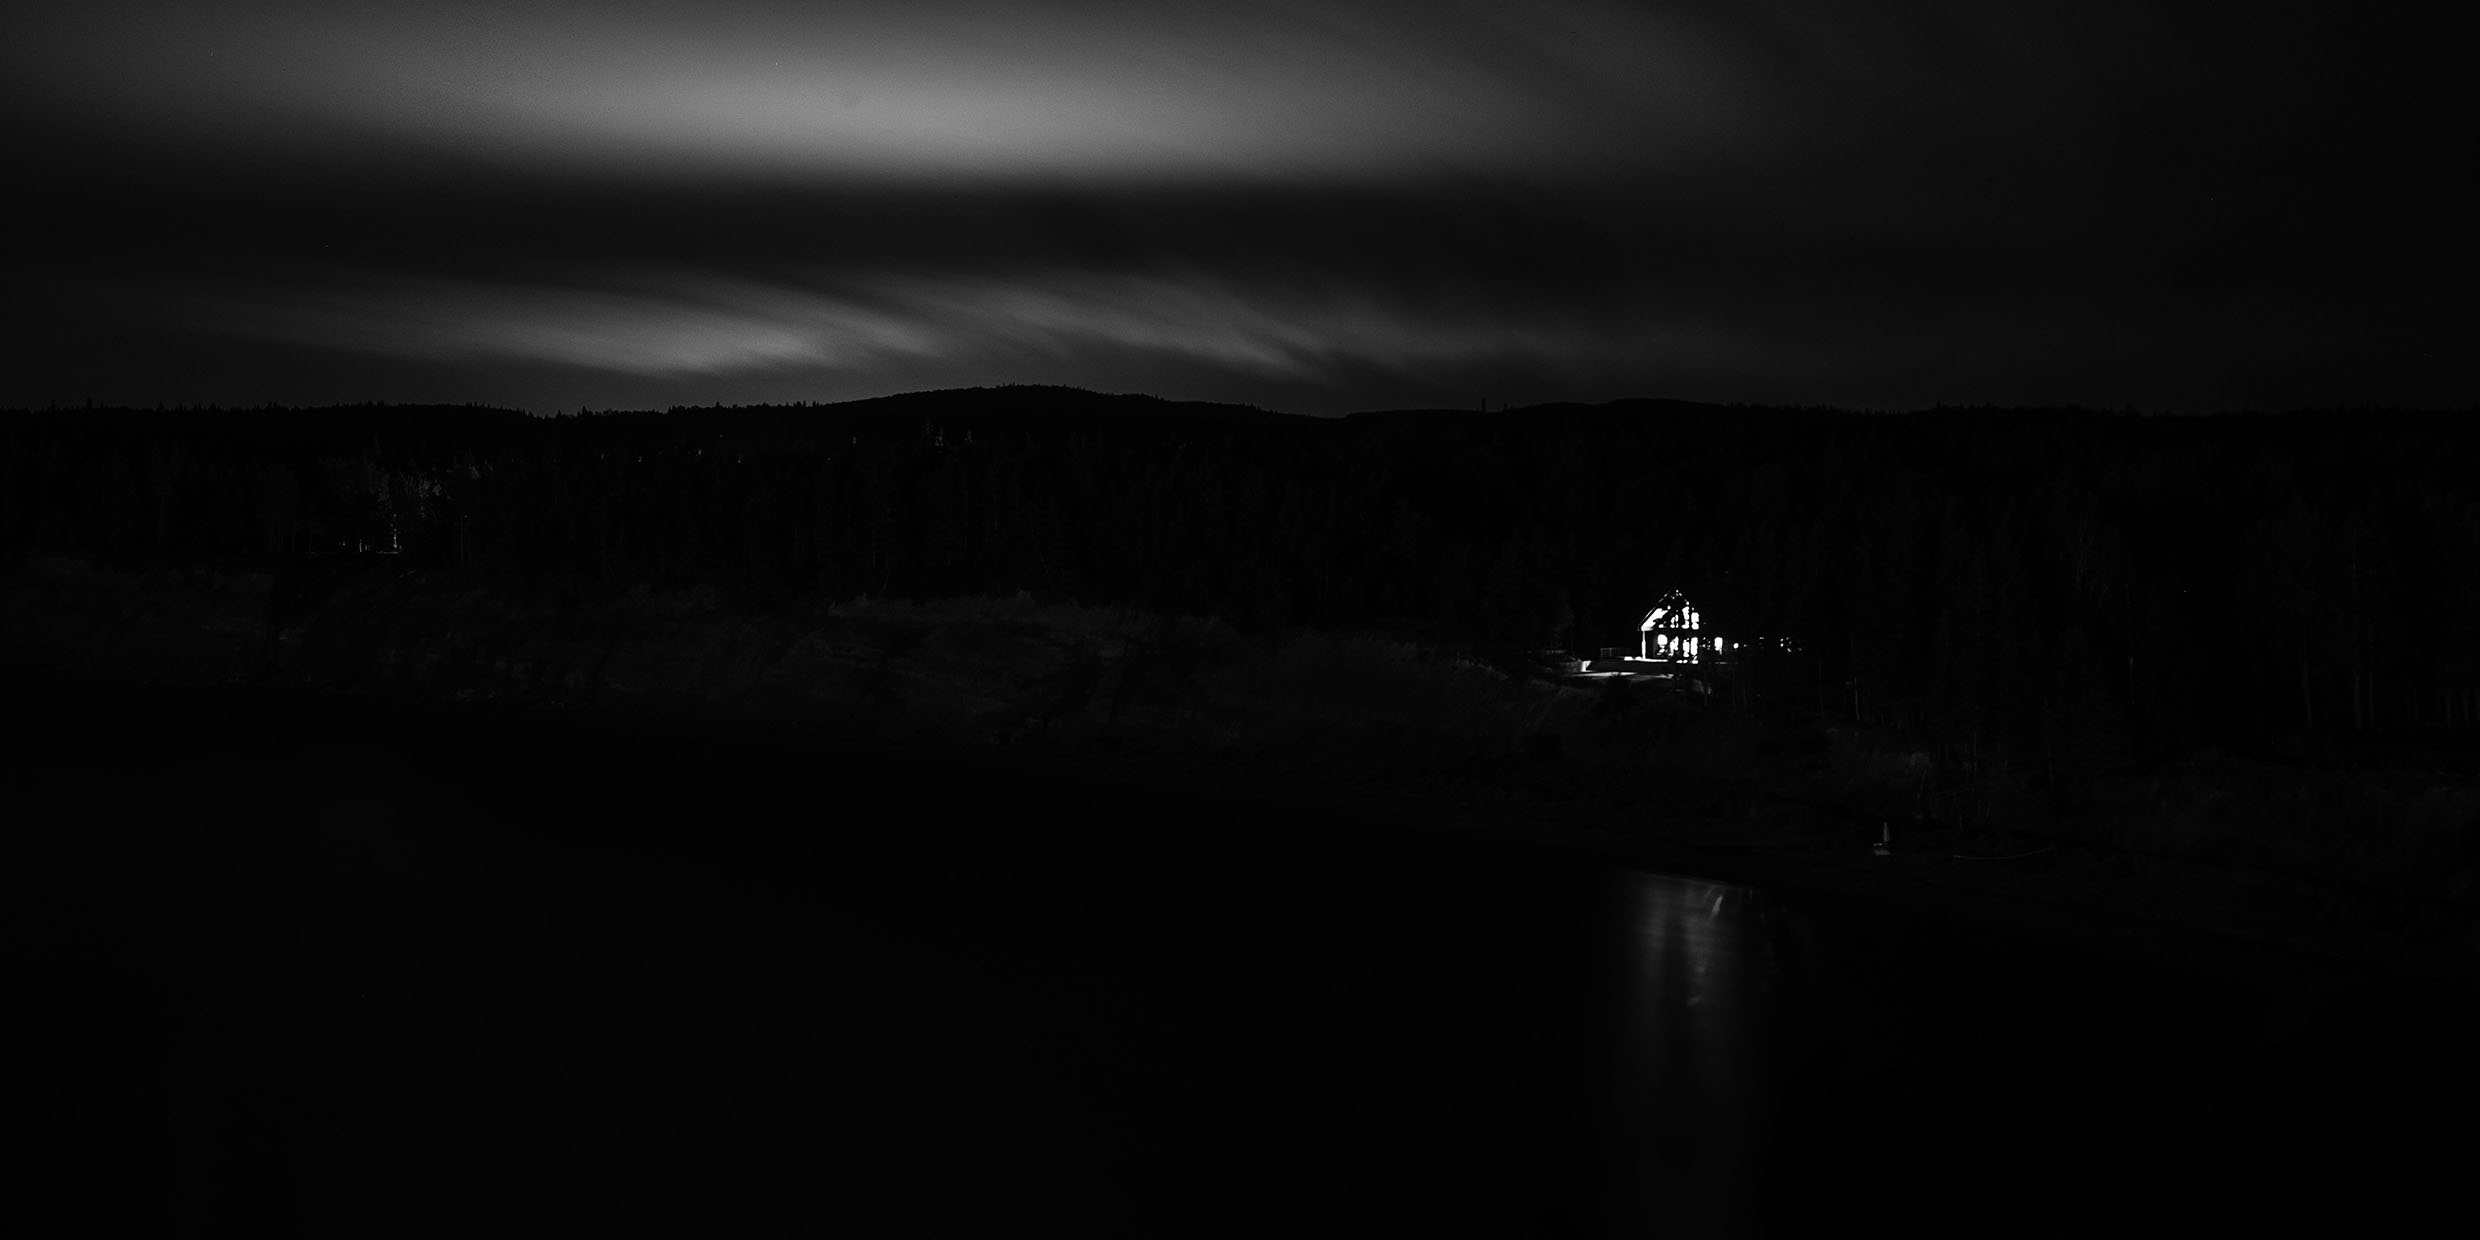 Black-and-white image of a single illuminated house in a dark night